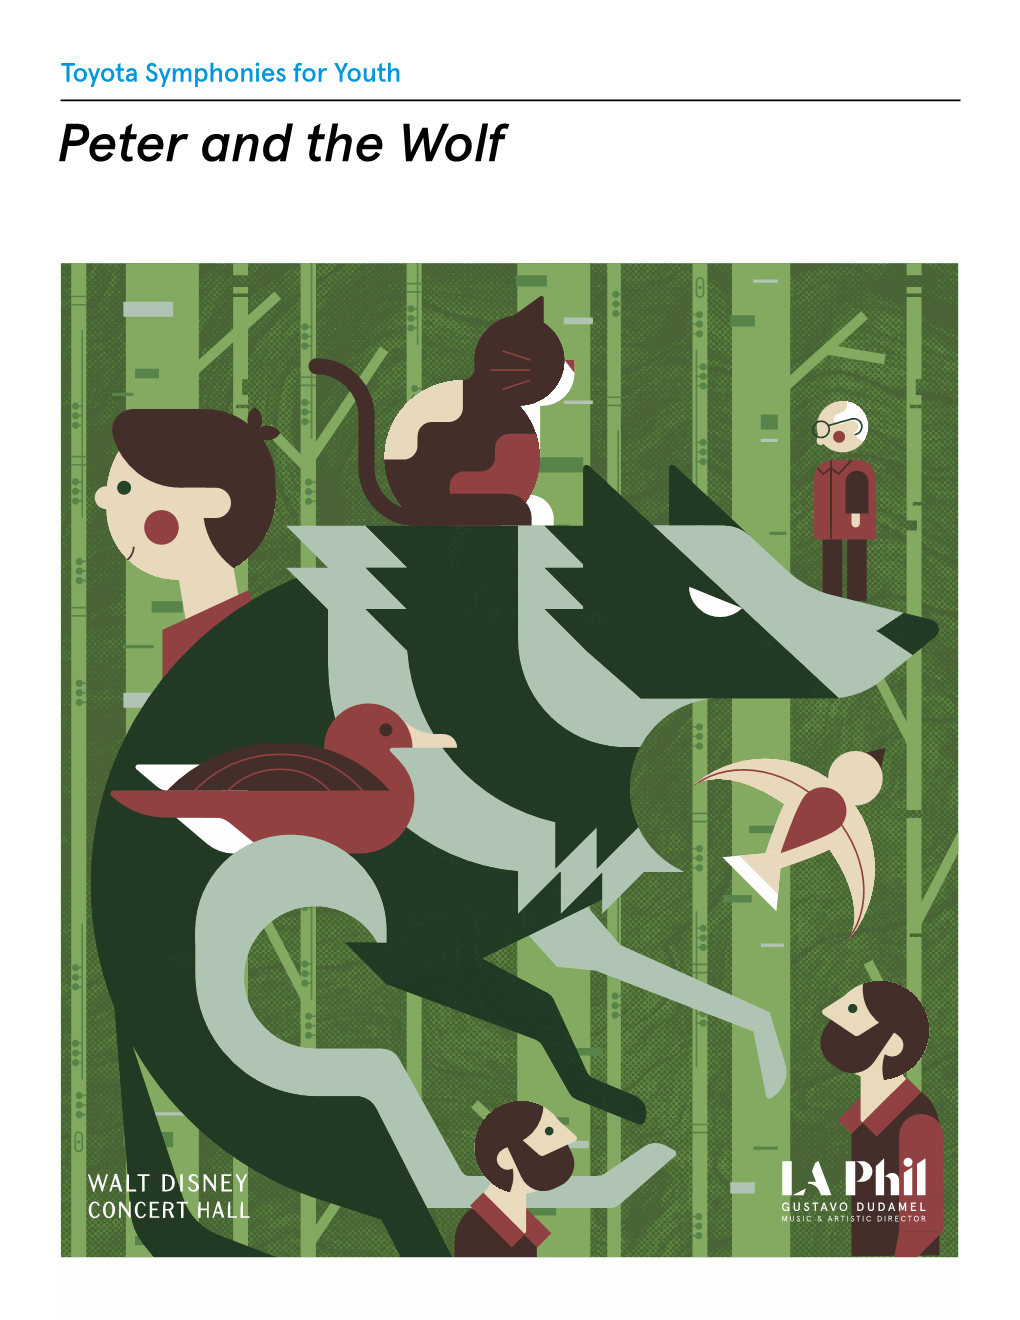 Peter and the Wolf About the Composer